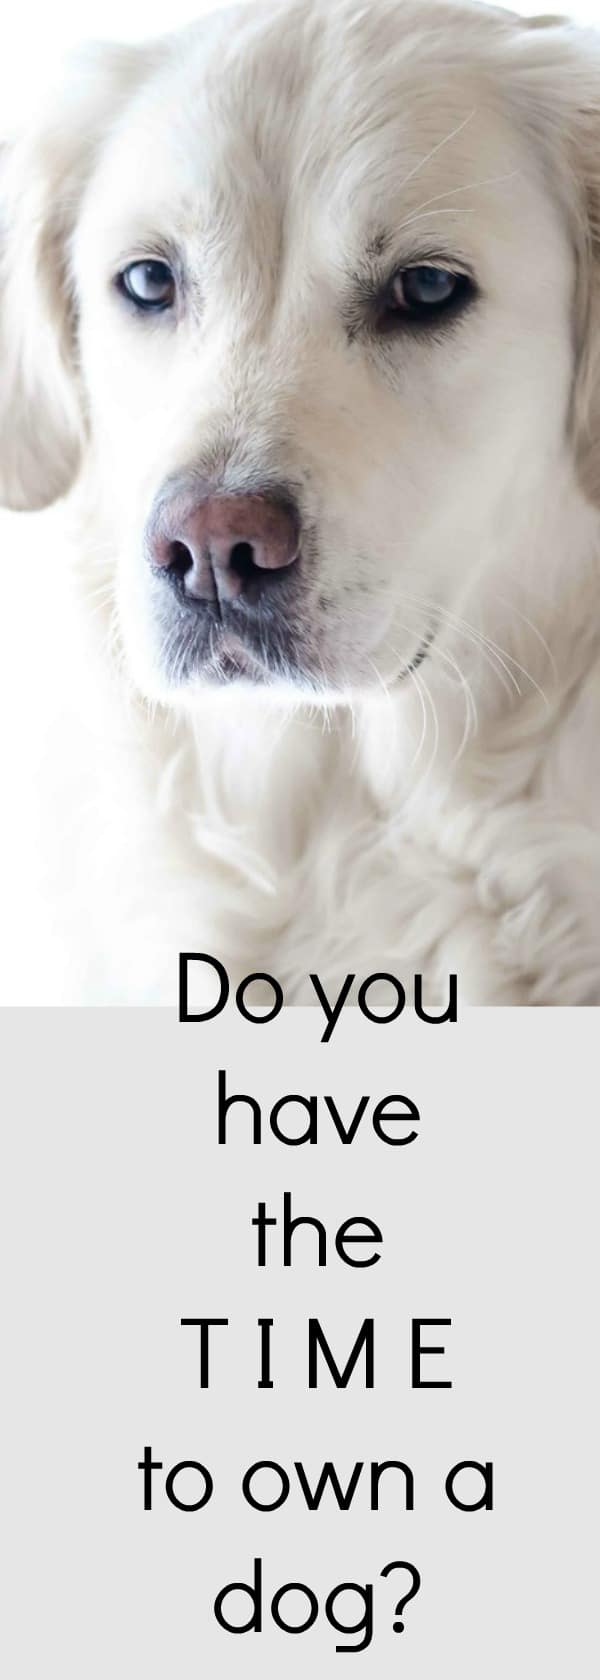 Do you have the time to own a dog?